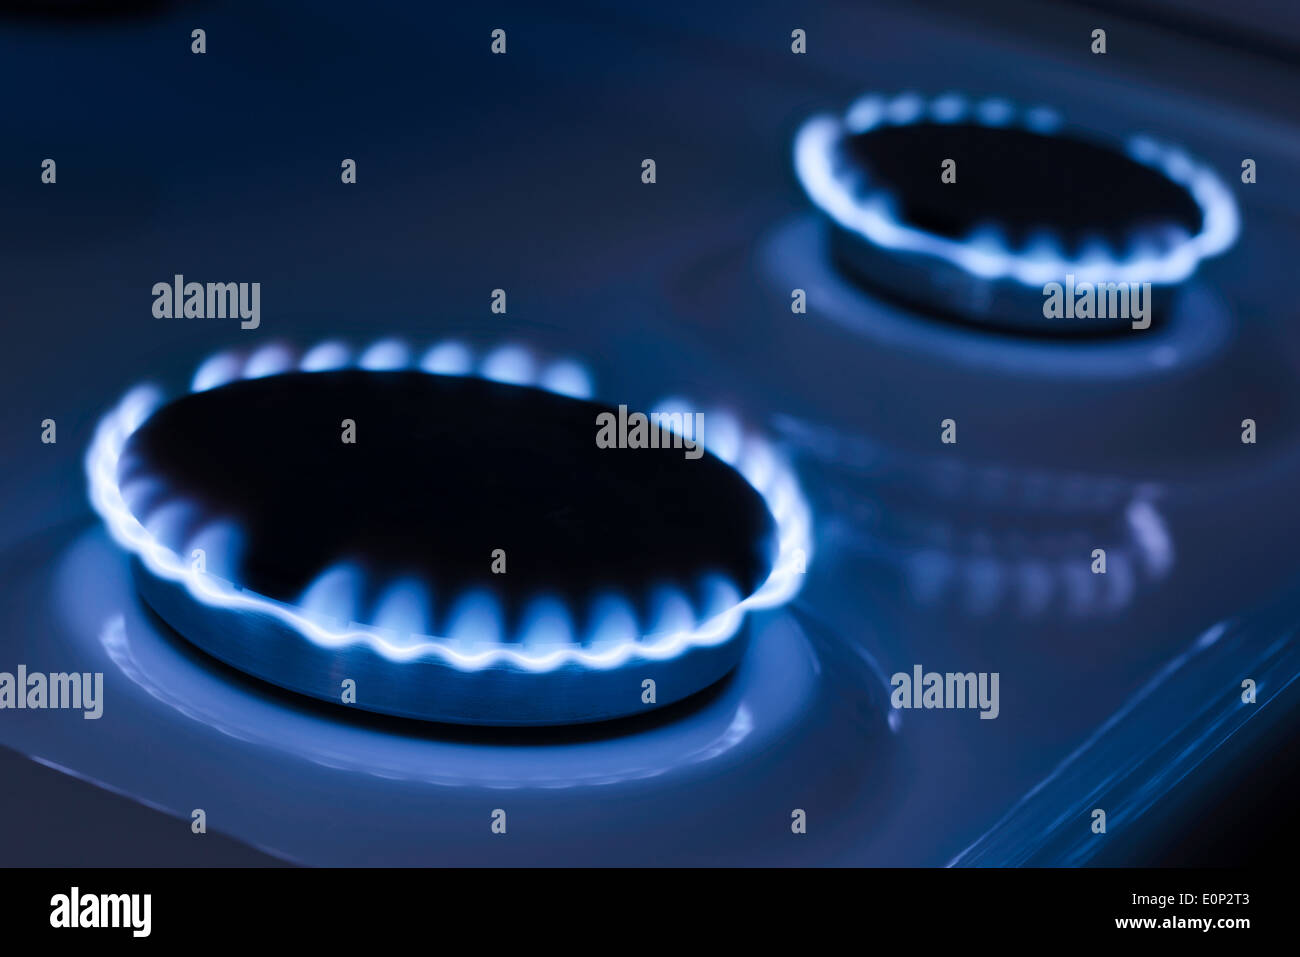 The blue flame from the burner of a gas stove Stock Photo